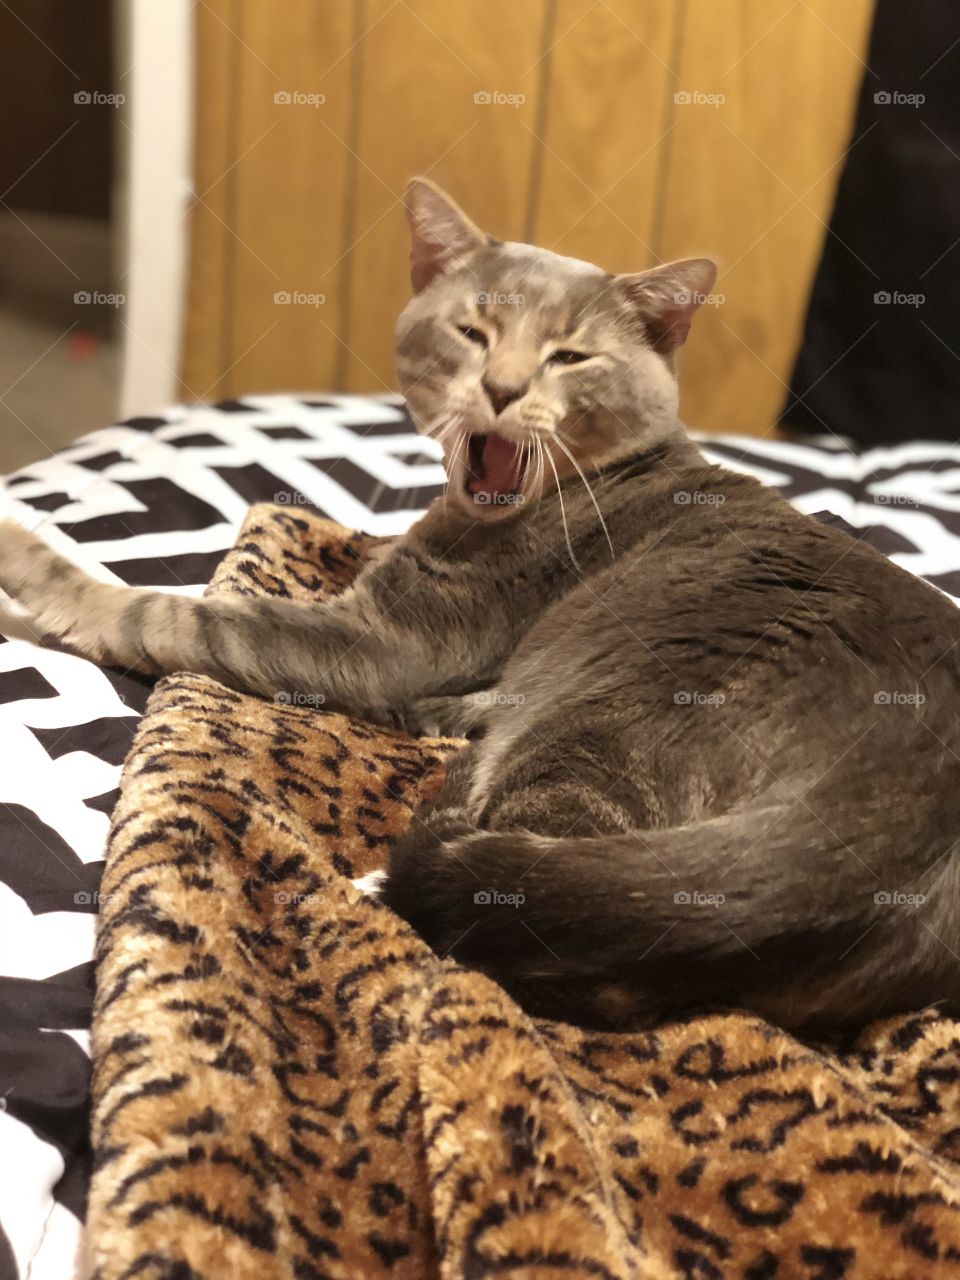 Big yawn from a handsome kitten 